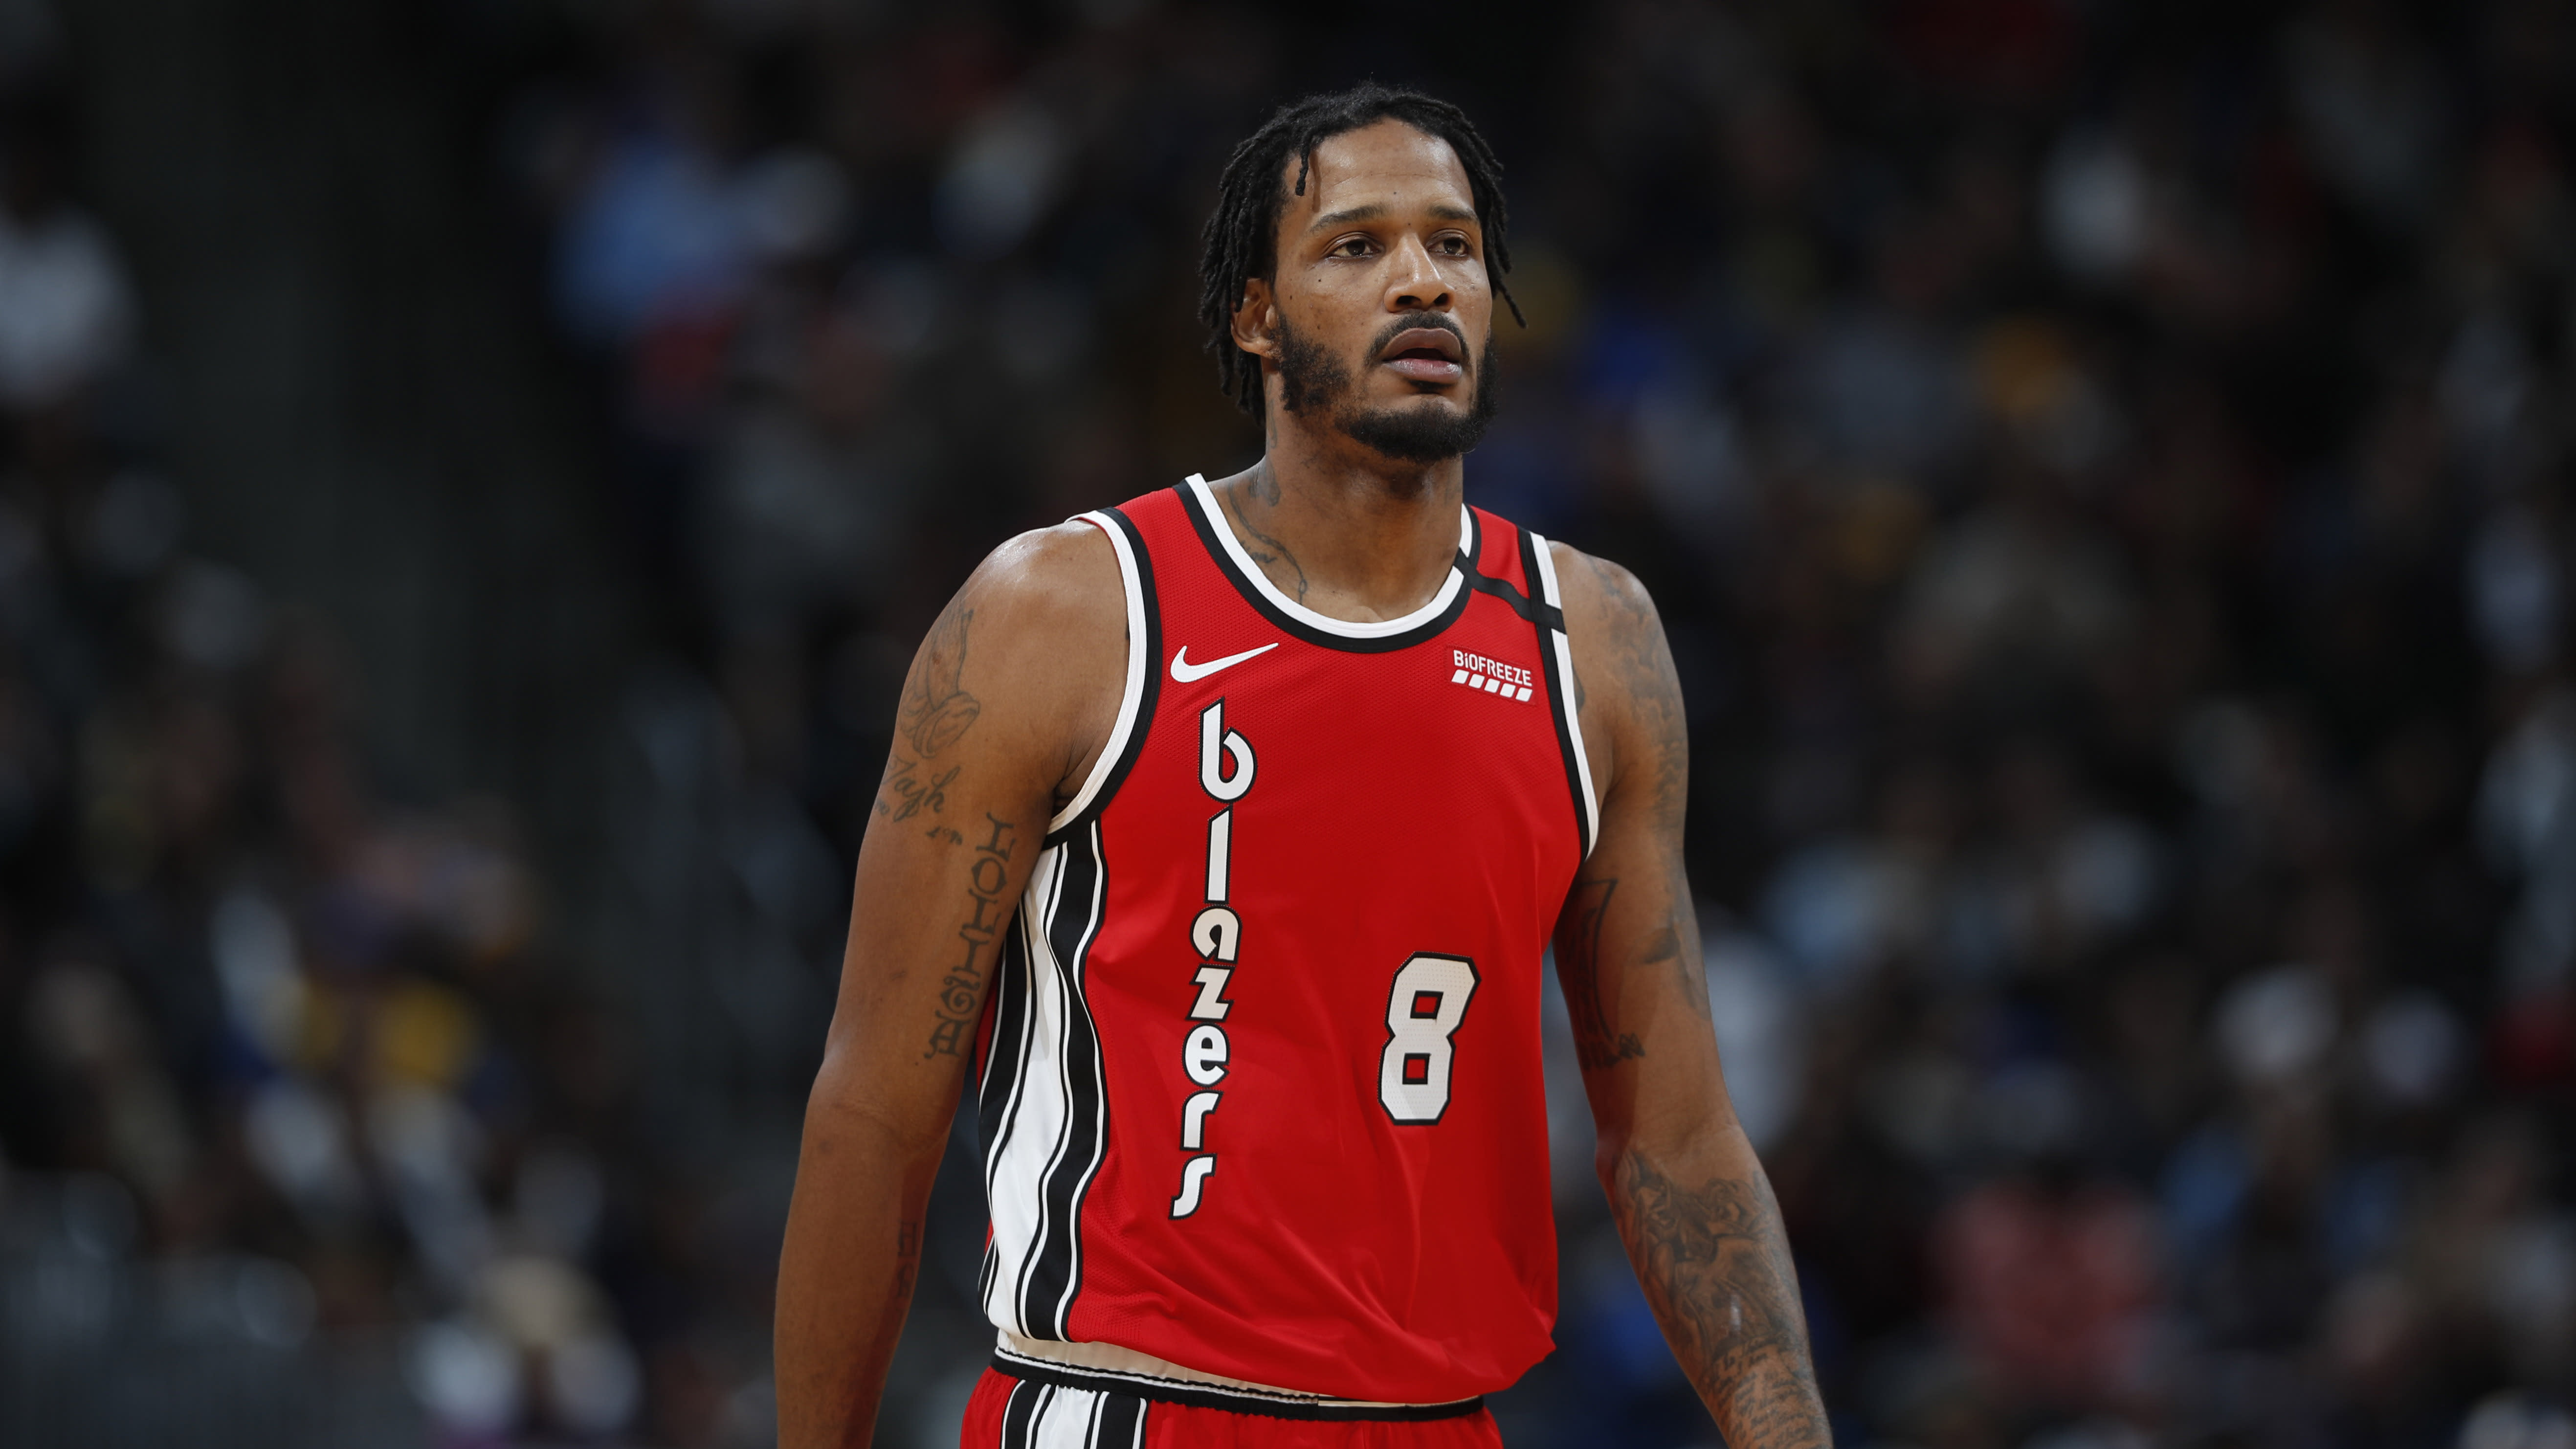 Trevor Ariza denies claim that he abused his son